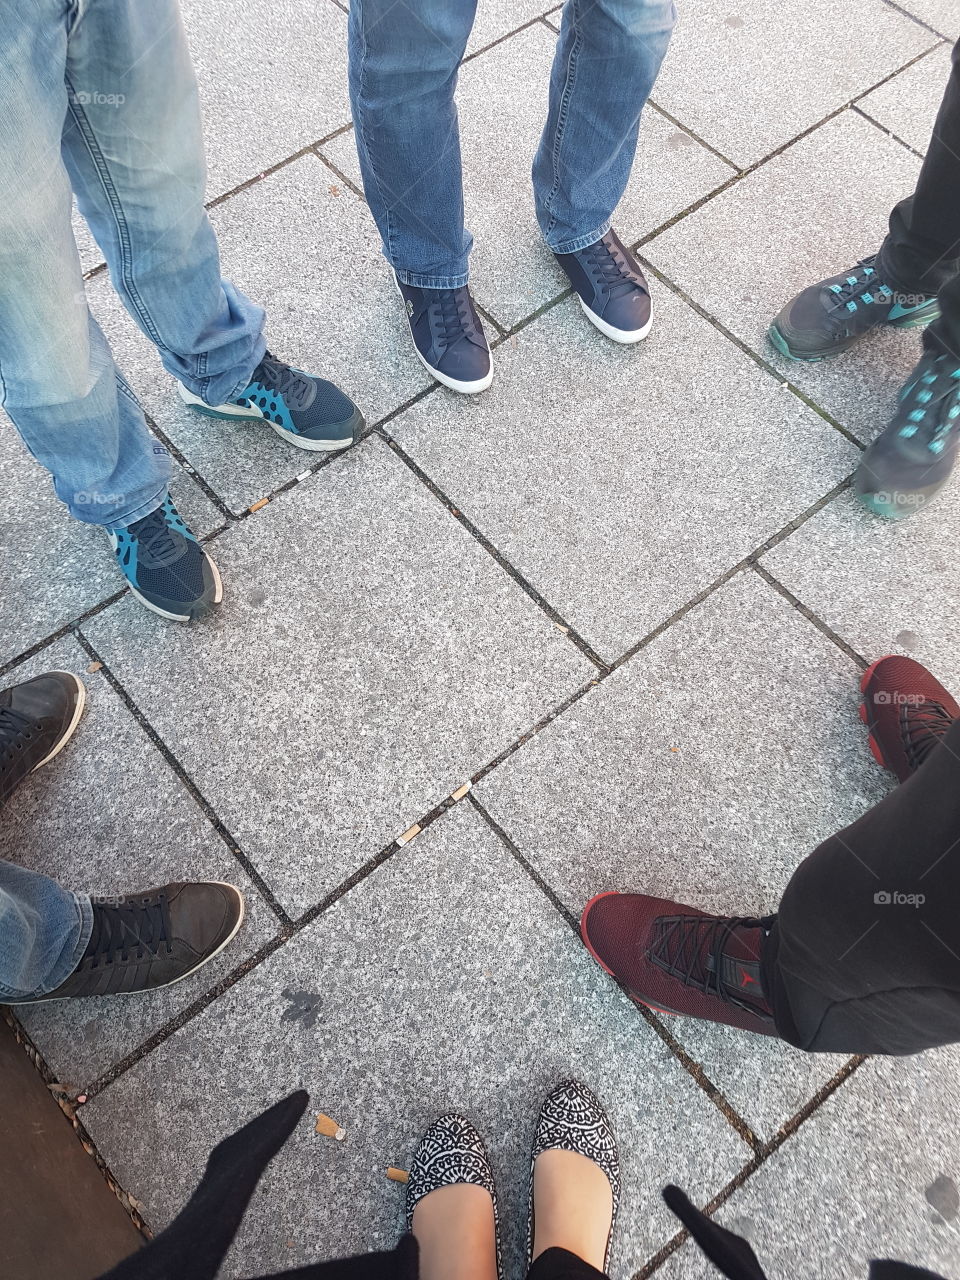 People's shoes gathering together